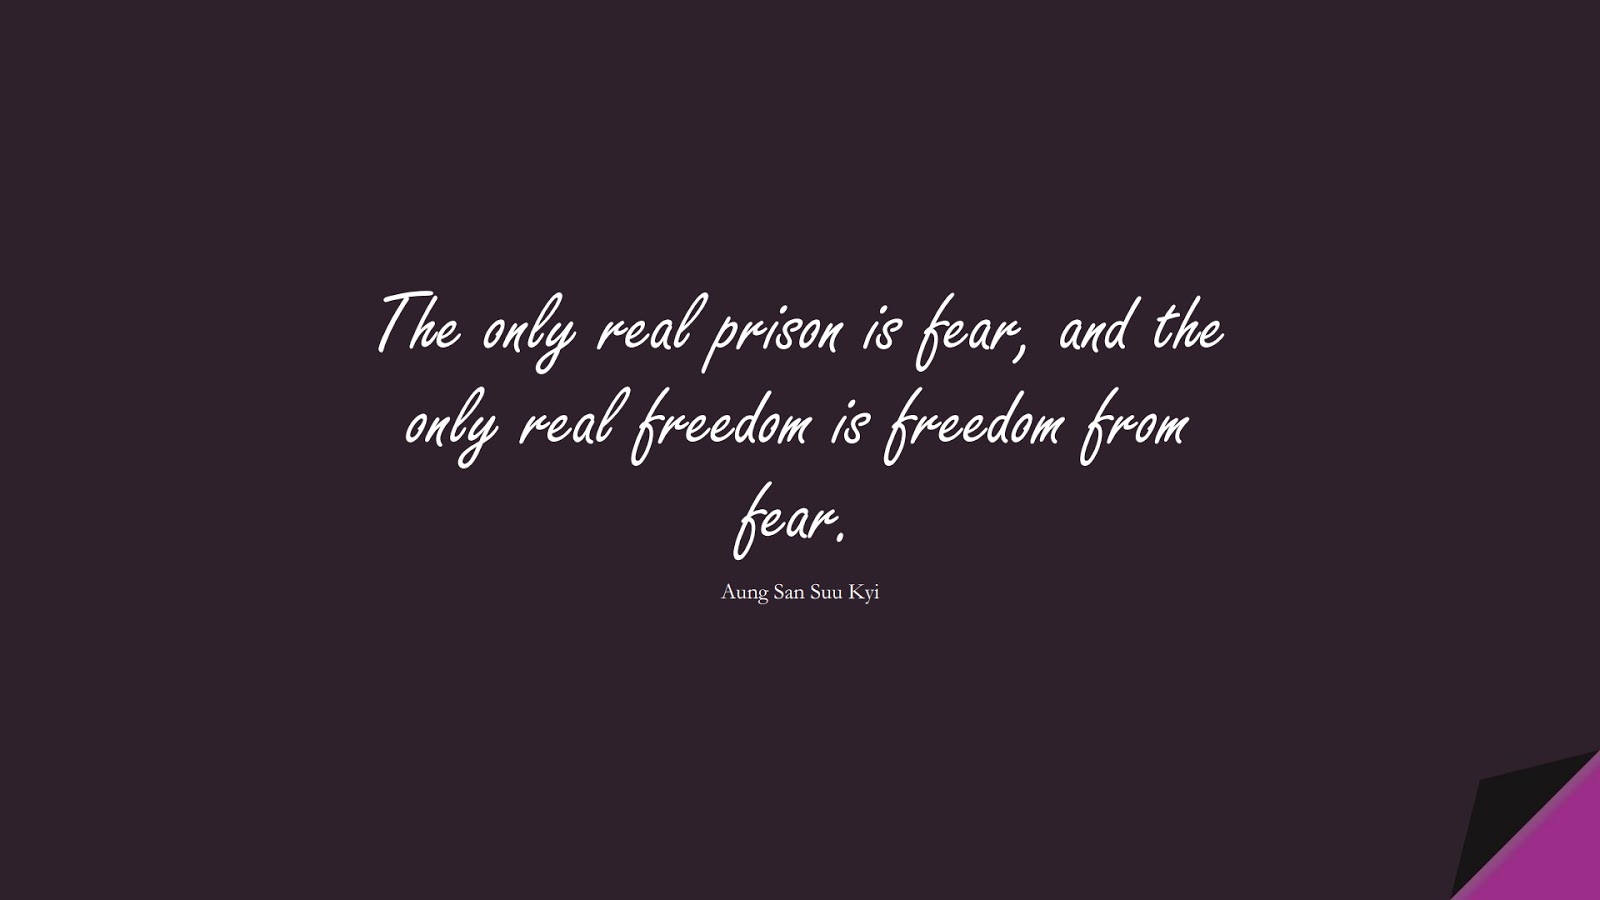 The only real prison is fear, and the only real freedom is freedom from fear. (Aung San Suu Kyi);  #HumanityQuotes